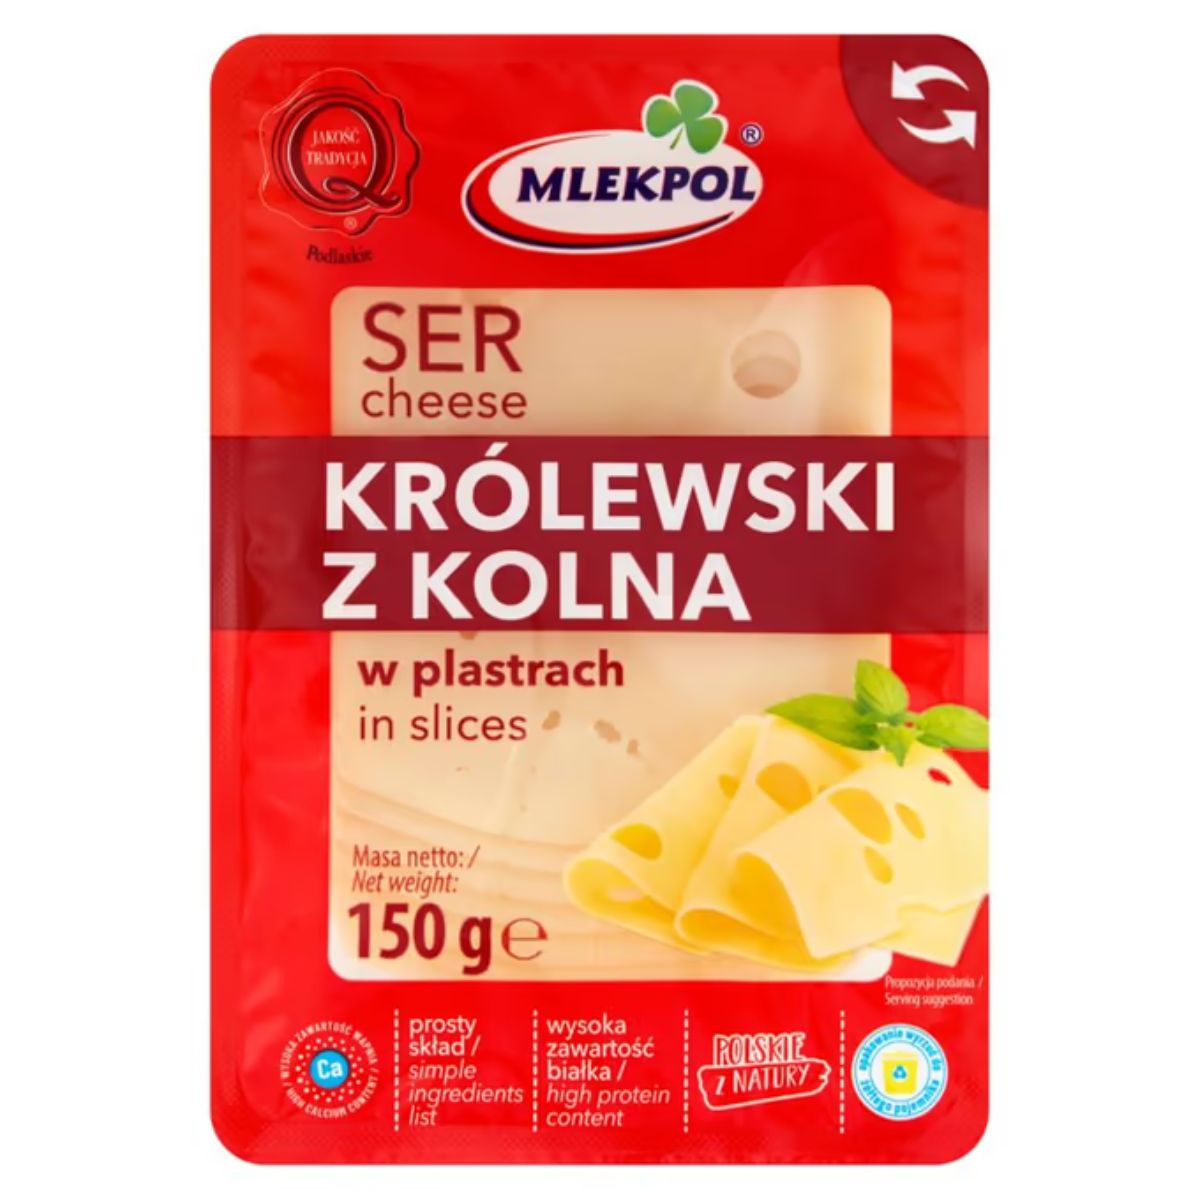 A package of Mlekpol - Krolewski Cheese - 150g with a label on it.